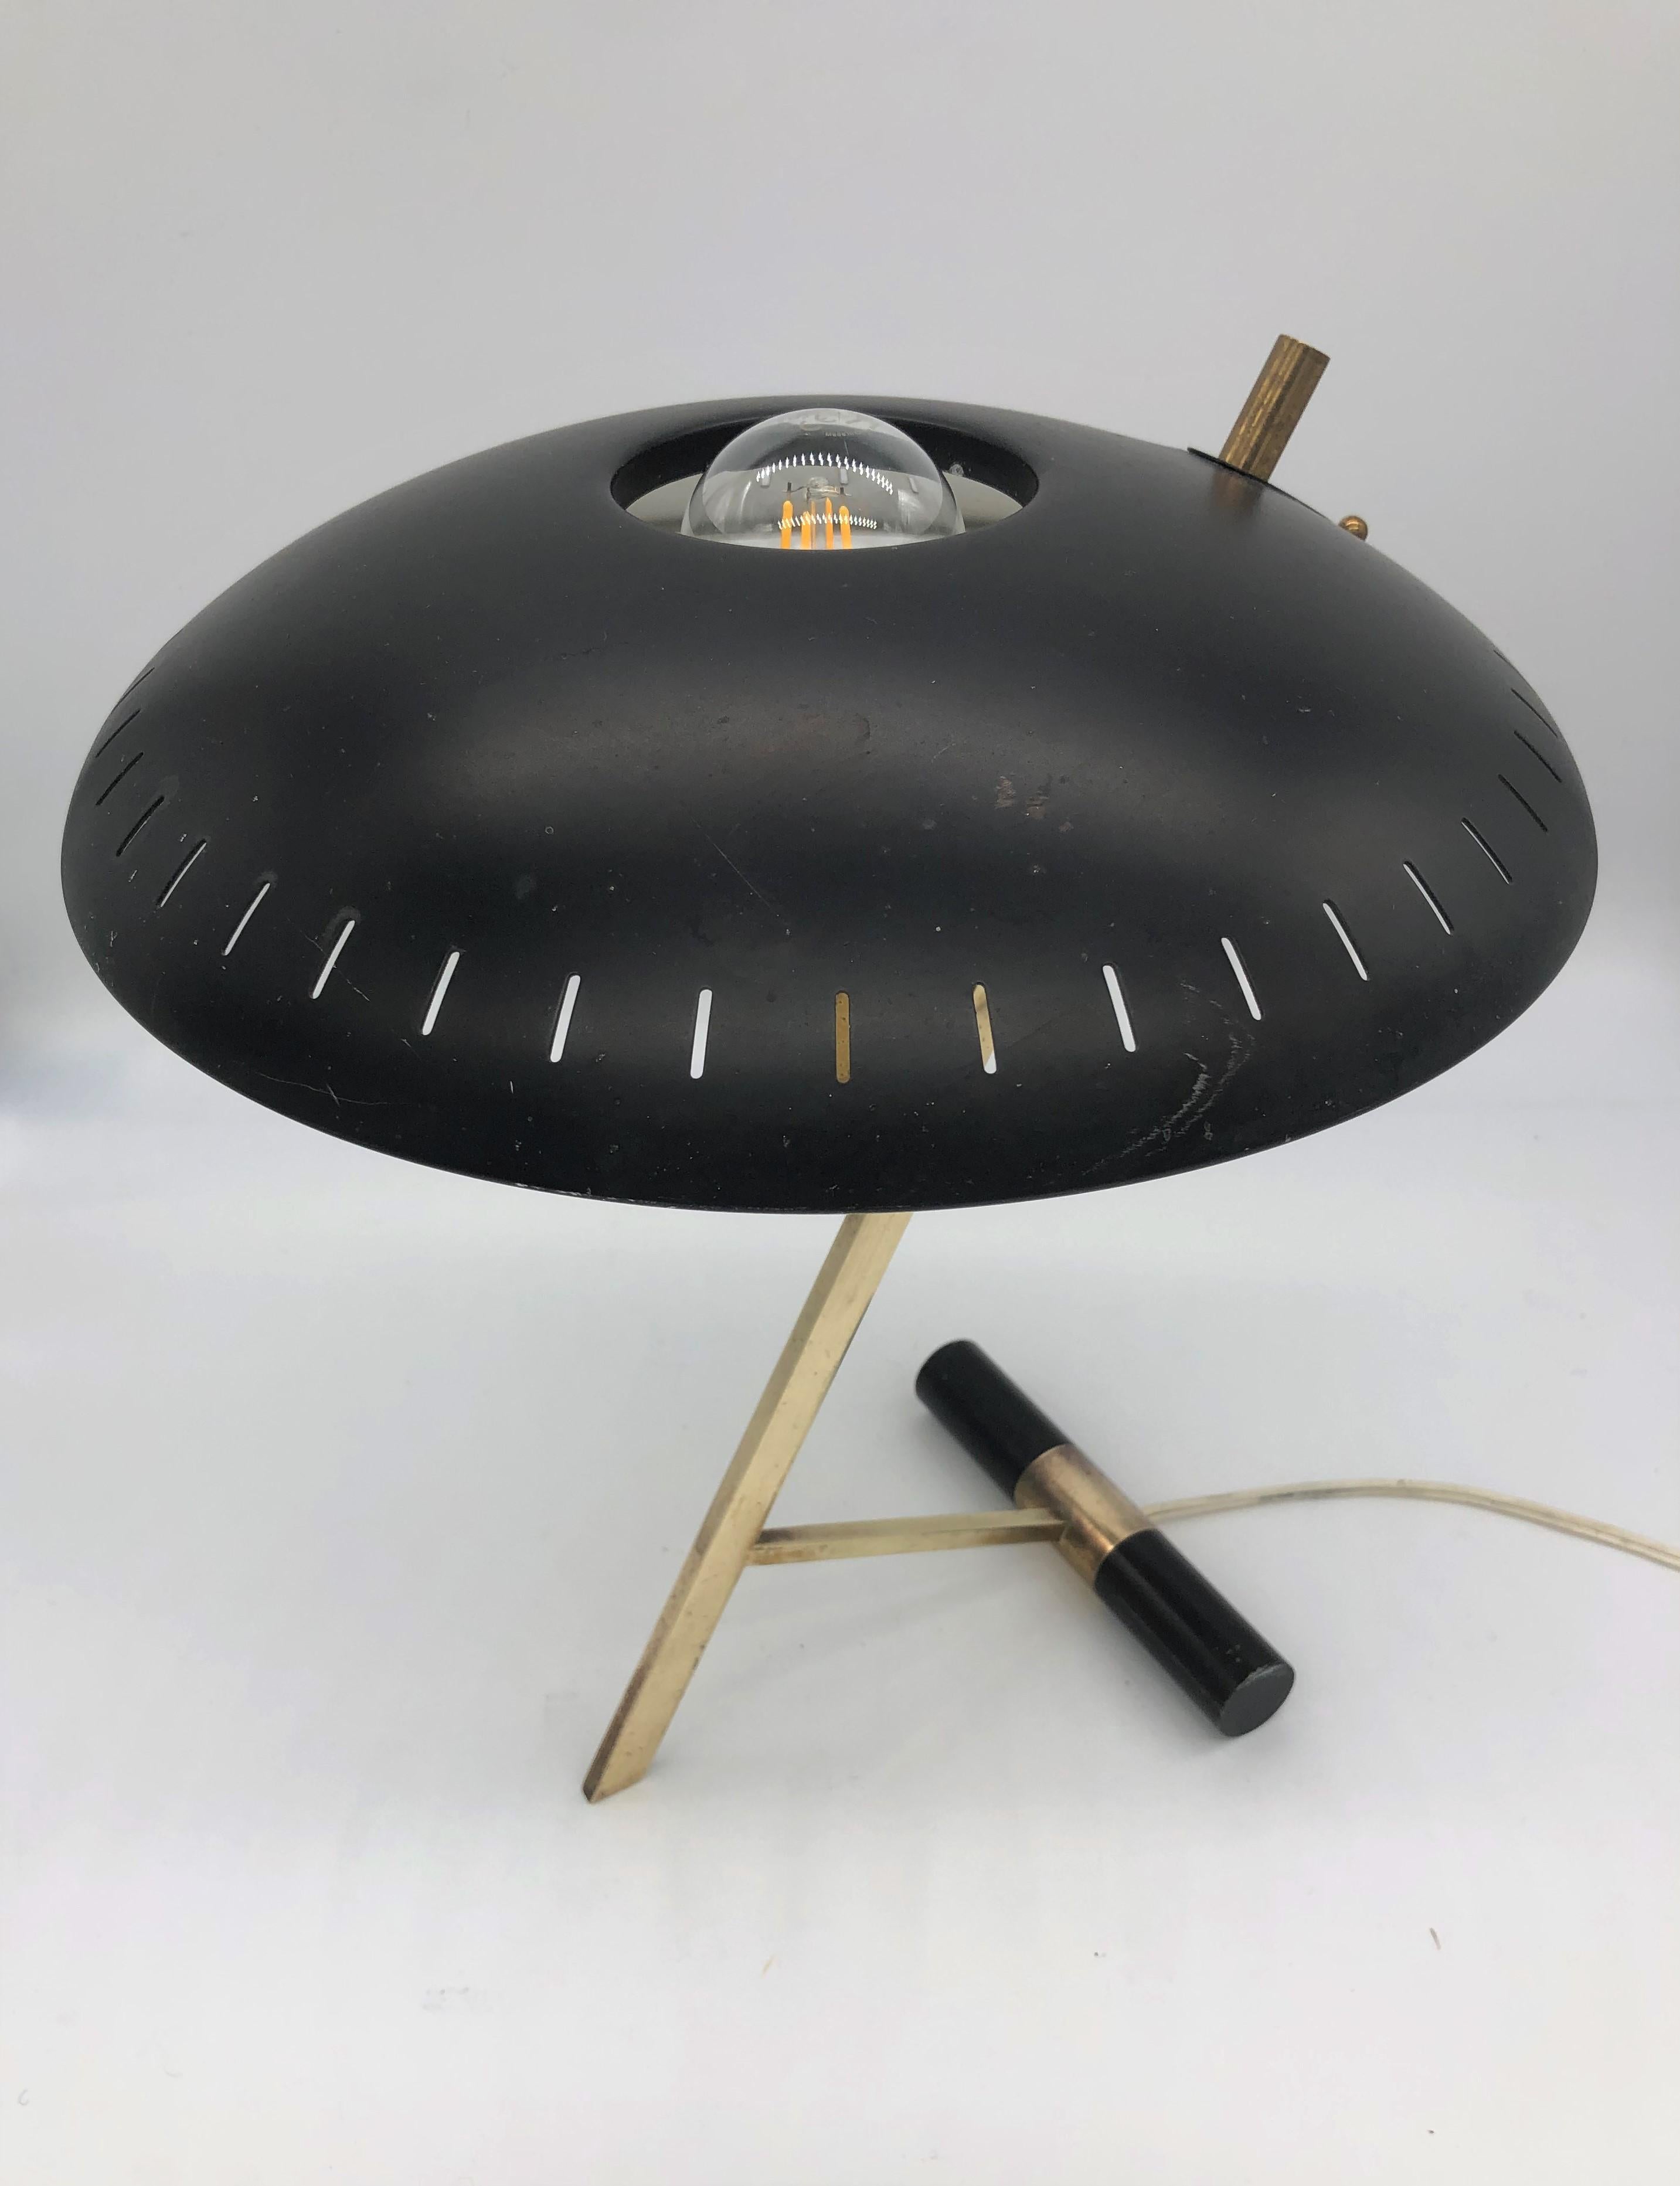 This table lamp designed by Louis Kalff in the 1950s and manufactured by Phillips is an iconic piece of 20th century design. The domed black lacquered metal shade stands on top of a gilt-brass foot. This model, named Z after its shape, is stamped